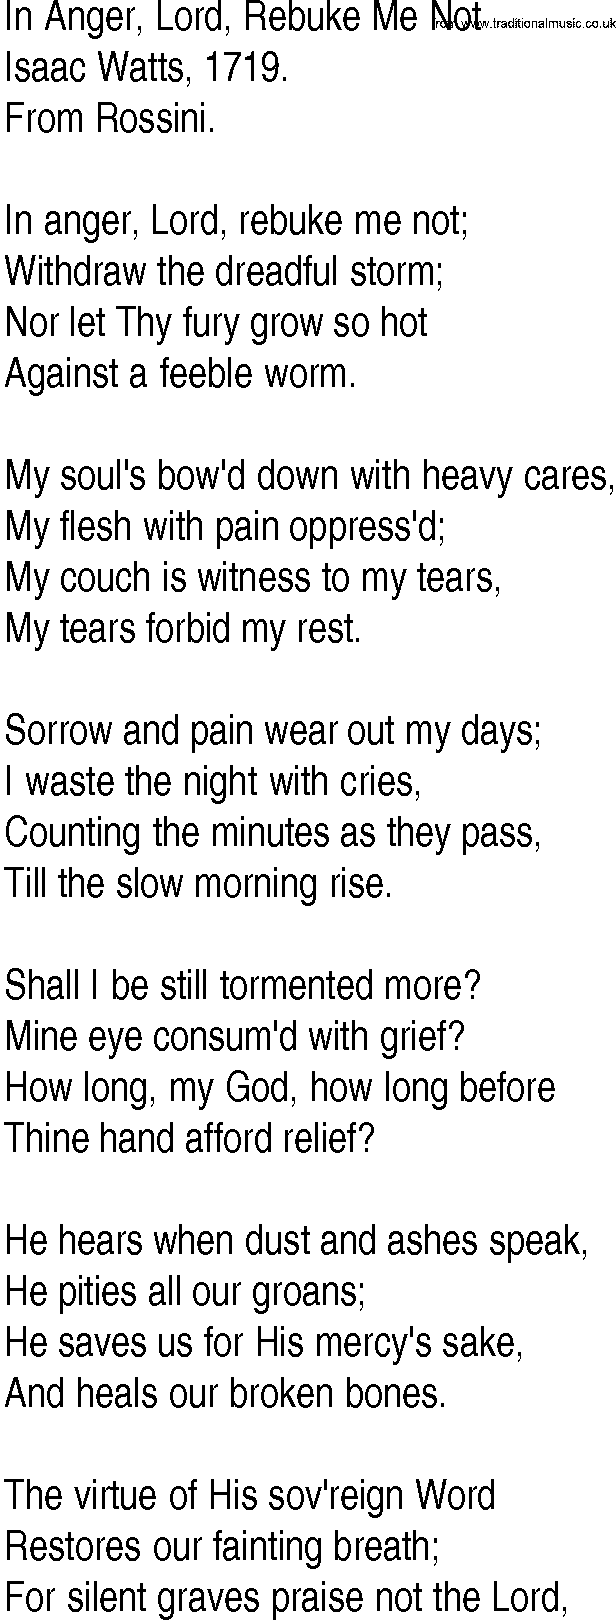 Hymn and Gospel Song: In Anger, Lord, Rebuke Me Not by Isaac Watts lyrics